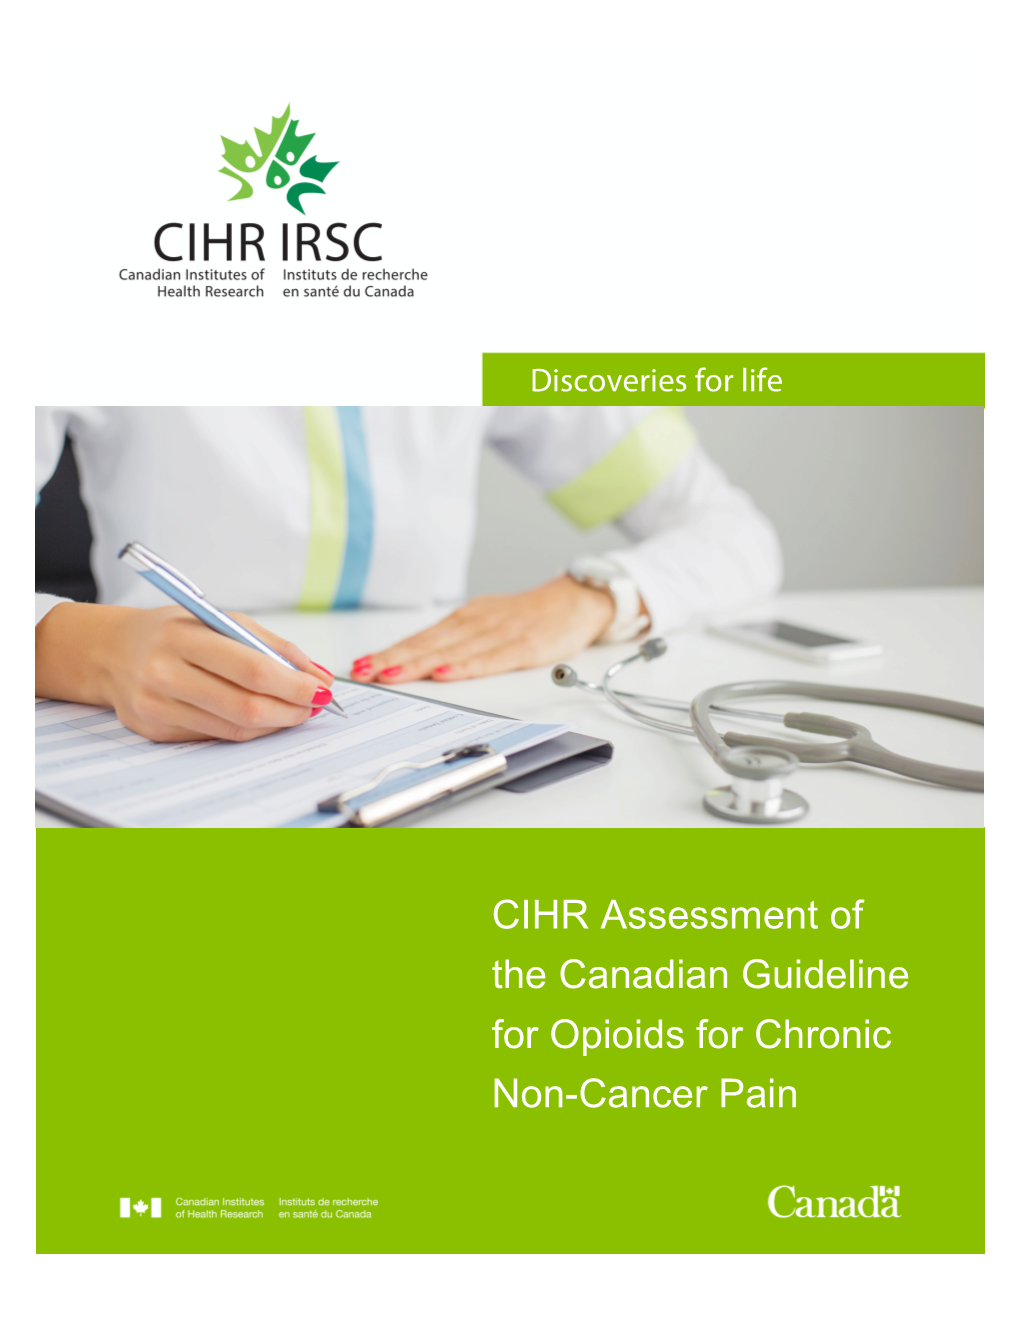 CIHR Assessment of the Canadian Guideline for Opioids for Chronic Non-Cancer Pain